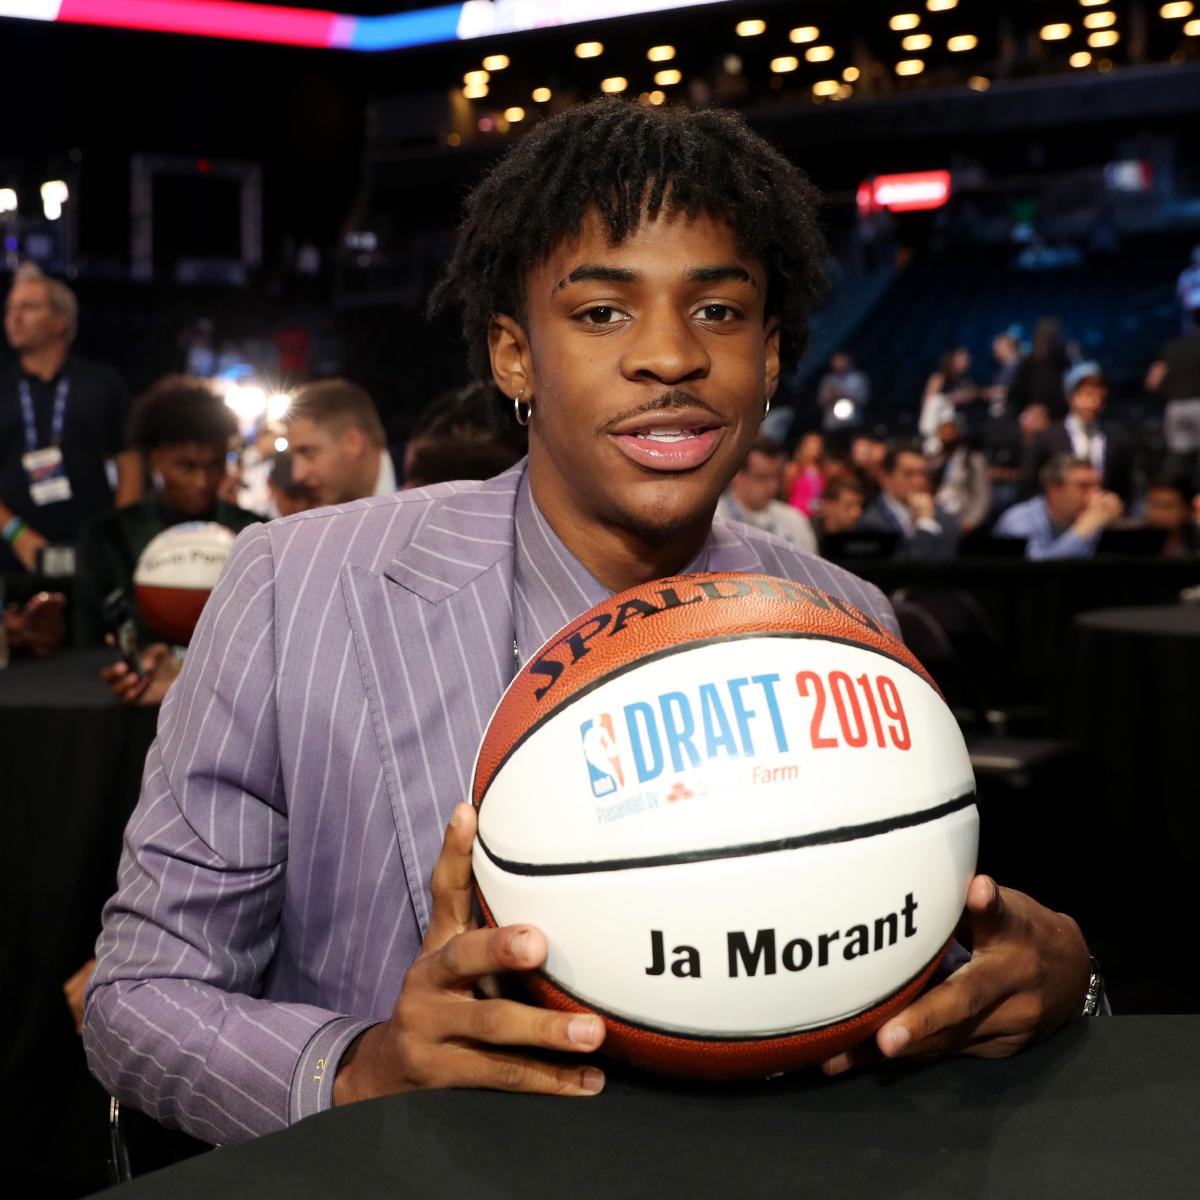 Ja Morant to Grizzlies: Memphis' Current Roster After 2019 NBA